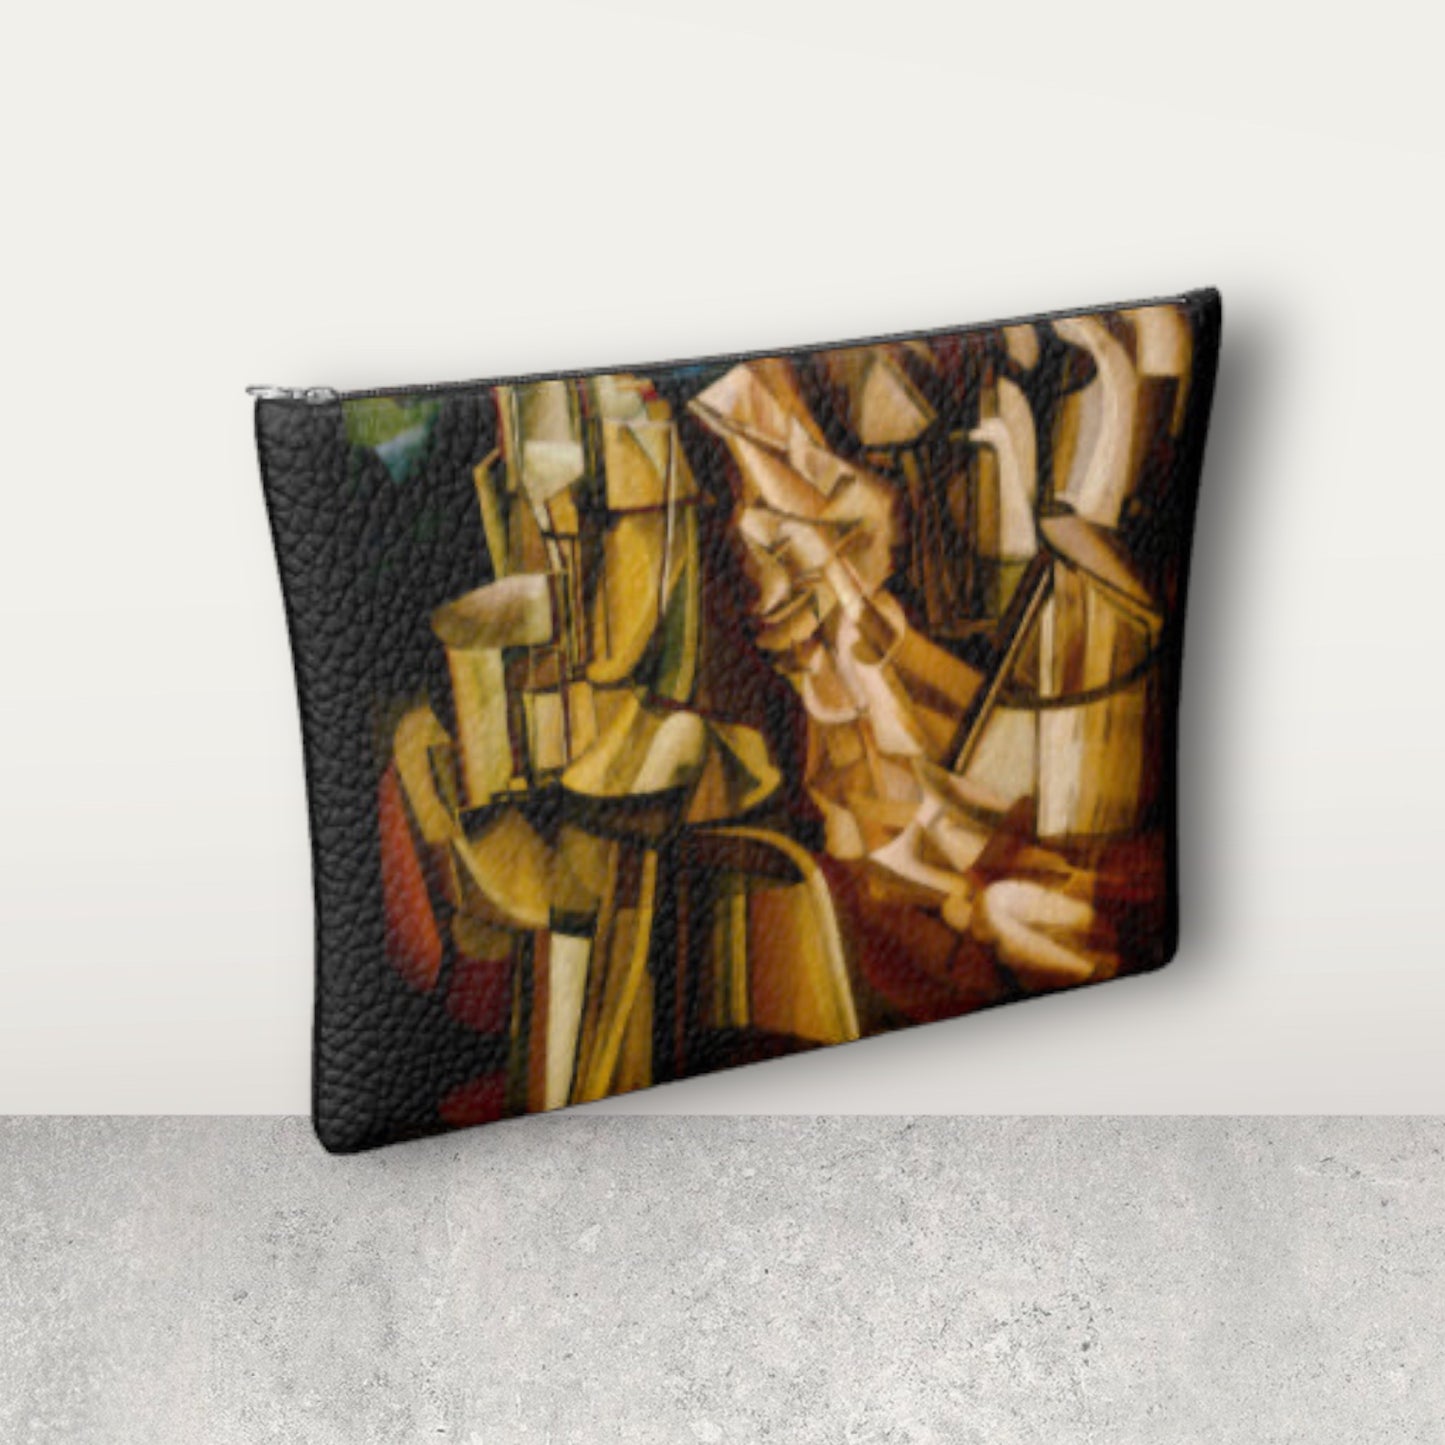 MARCEL DUCHAMP - KING AND QUEEN SURROUNDED BY SWIFT NUDES - LEATHER CLUTCH